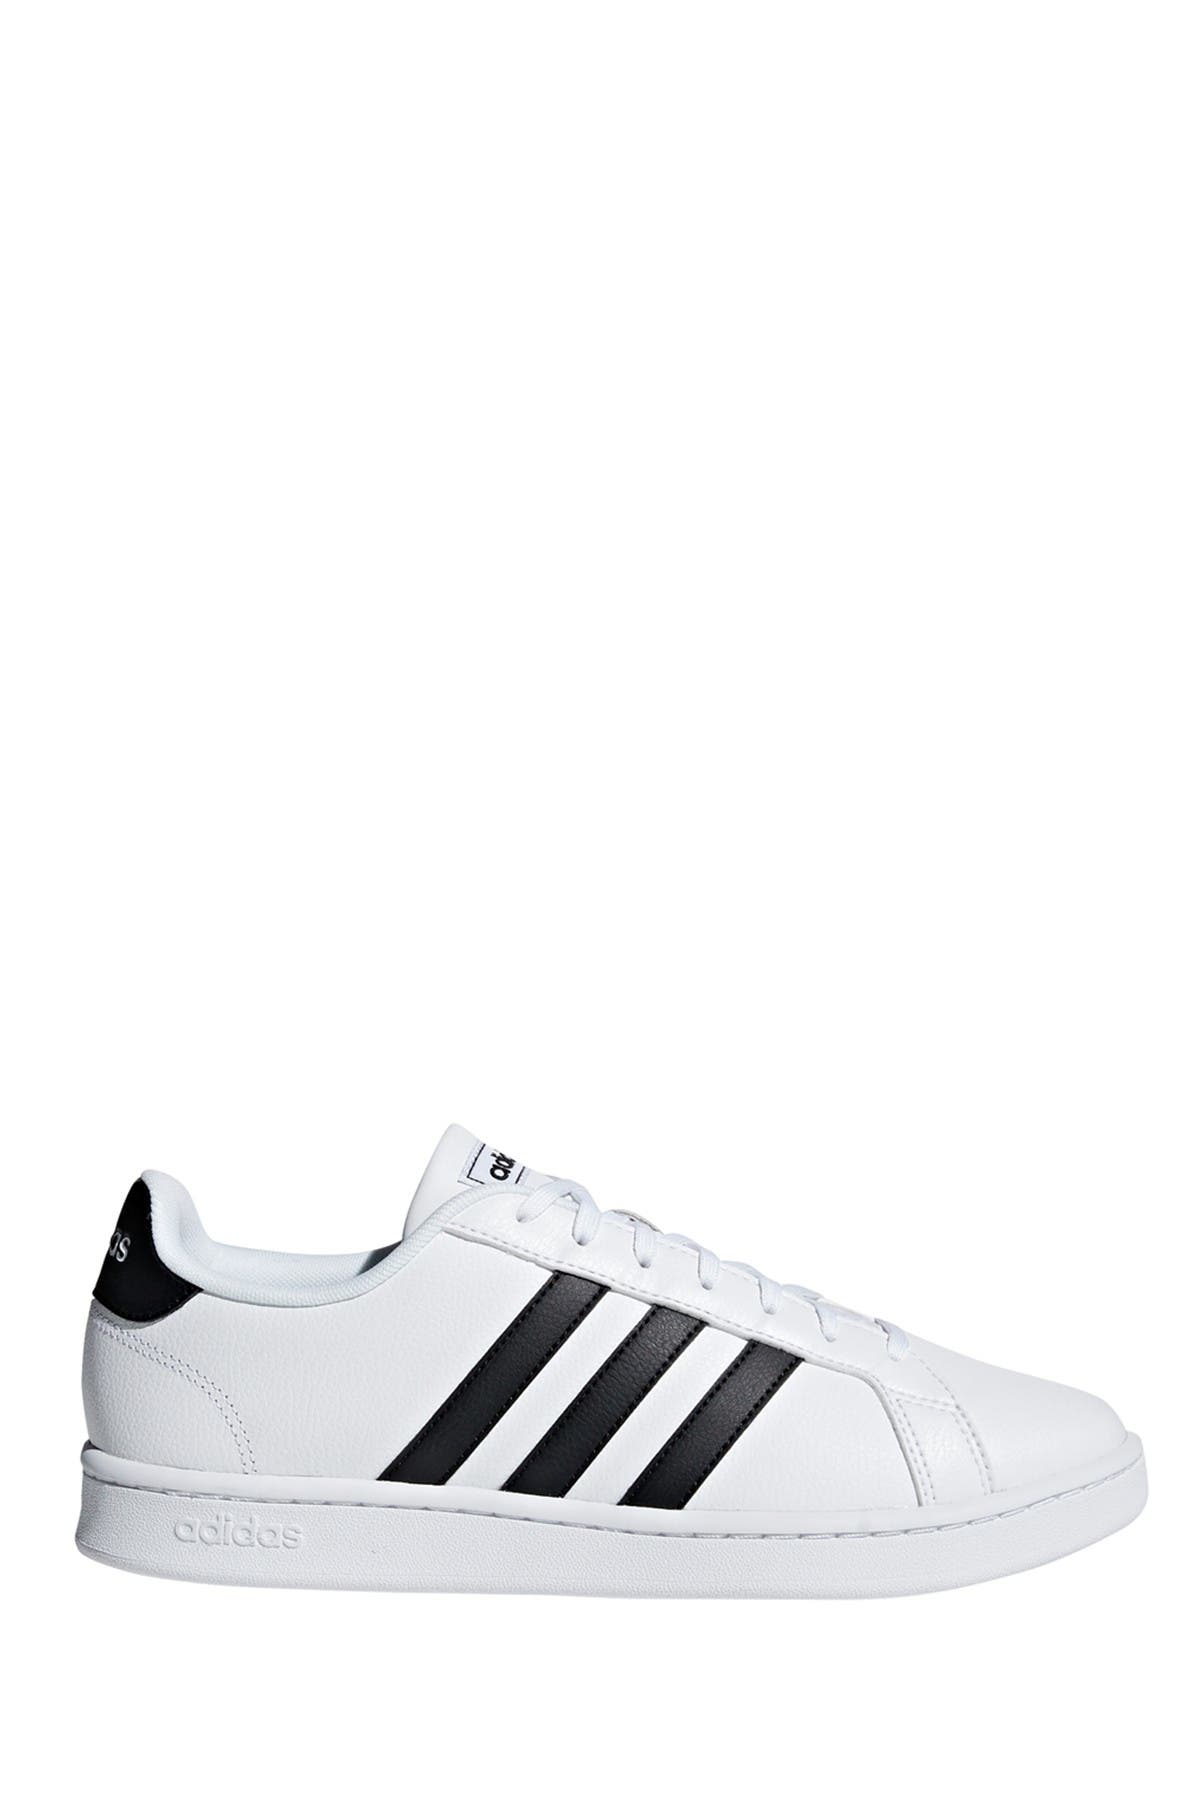 difference between adidas superstar and grand court